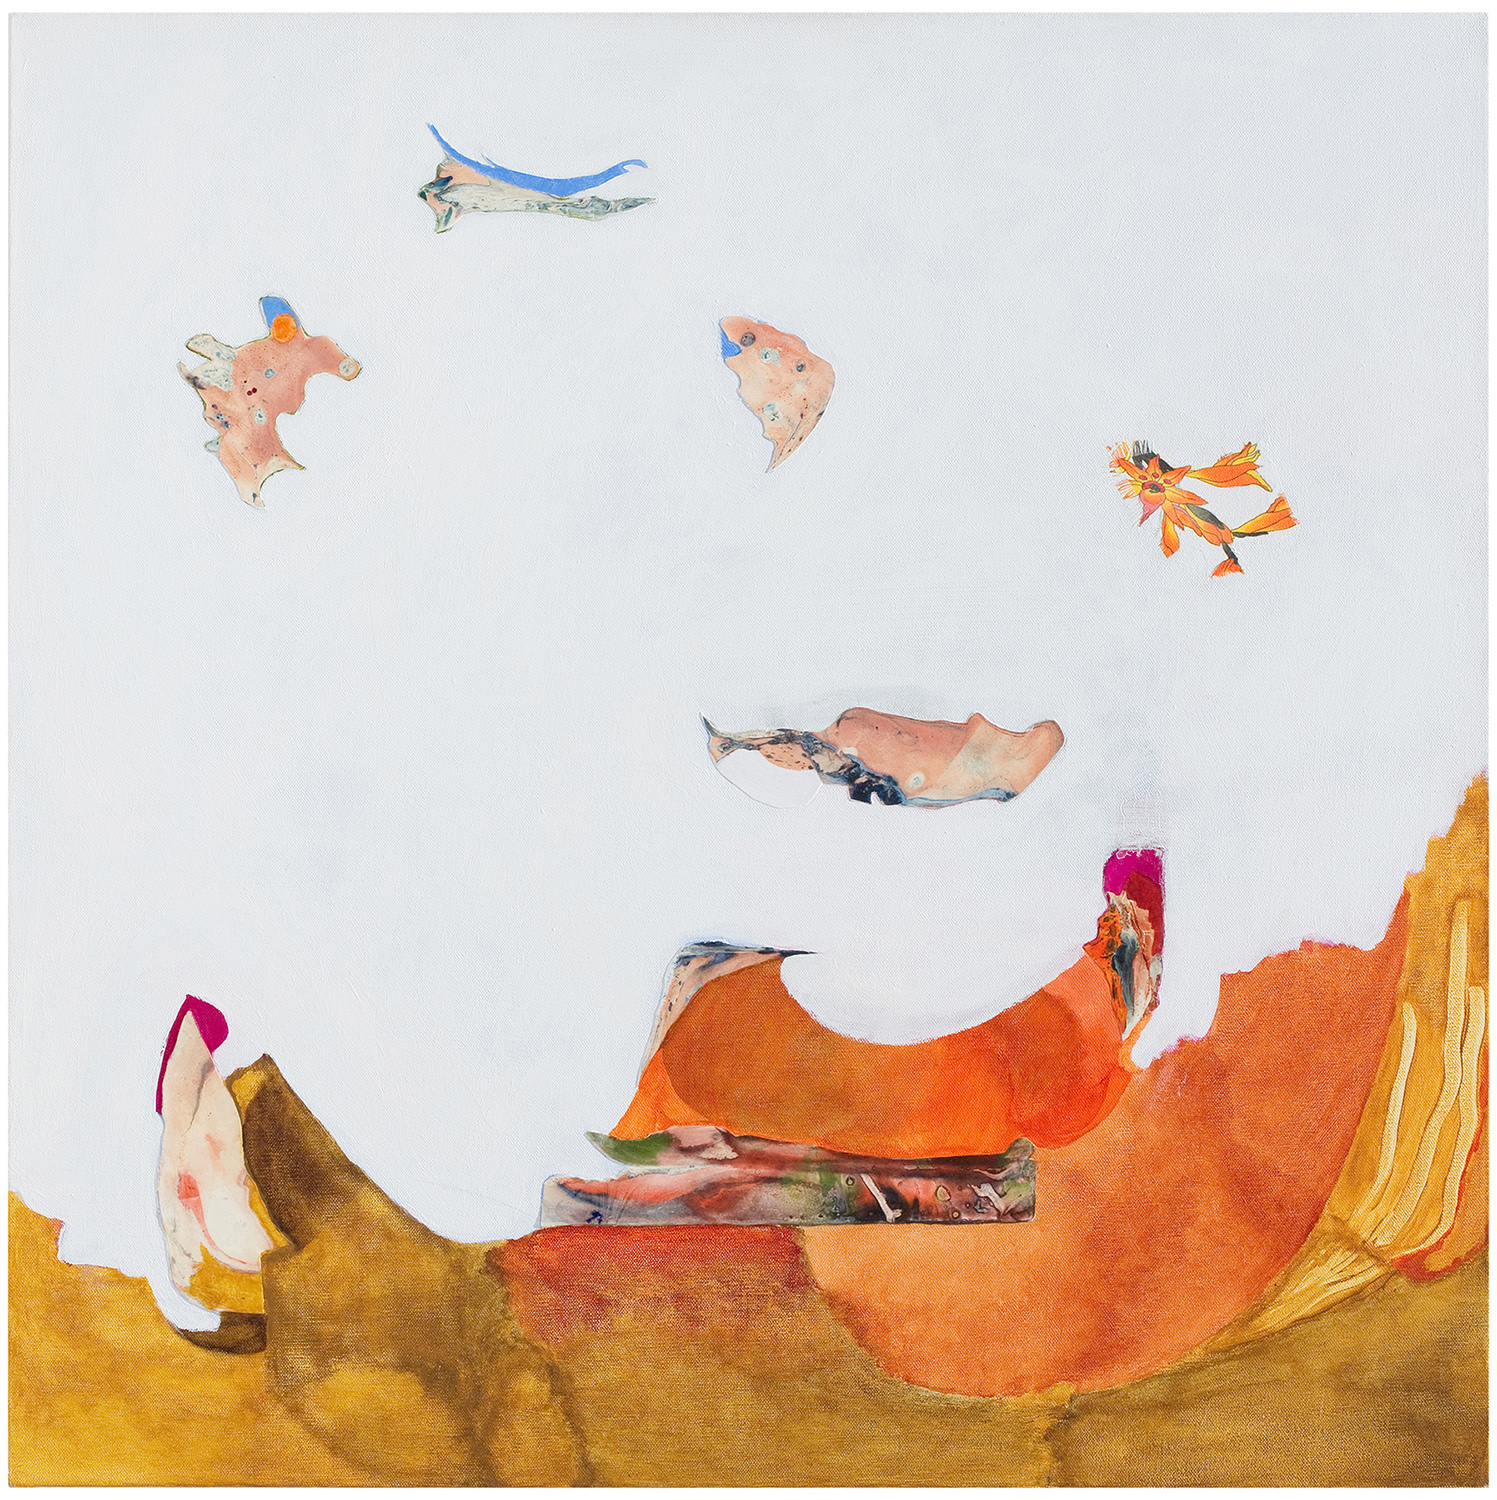  Joyce Pommer,  To a Land Beyond , Mixed media on canvas, 30x30 